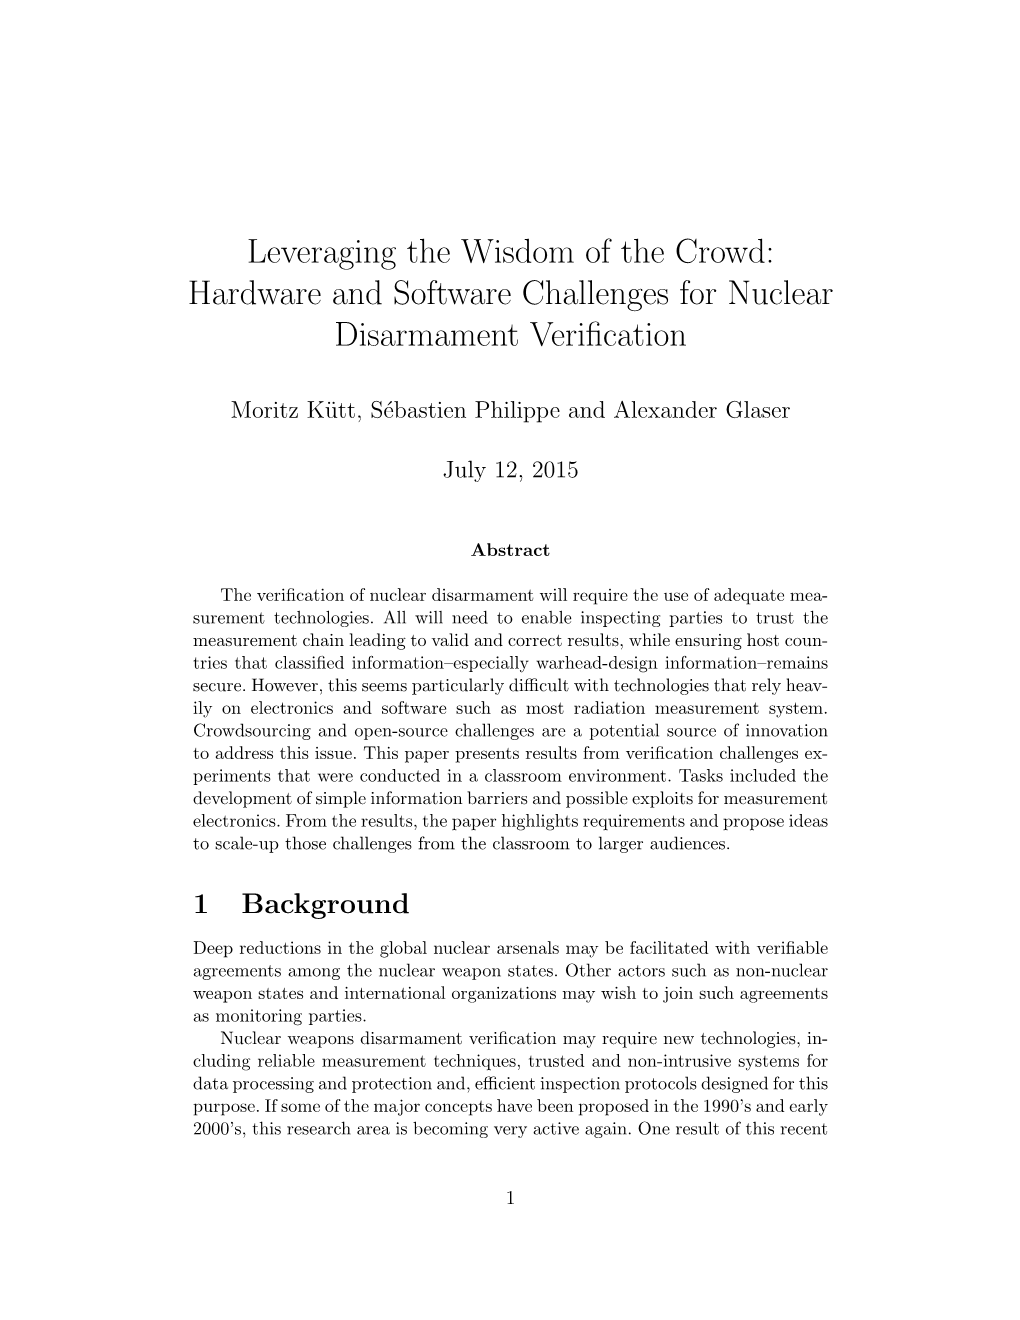 Leveraging the Wisdom of the Crowd: Hardware and Software Challenges for Nuclear Disarmament Veriﬁcation